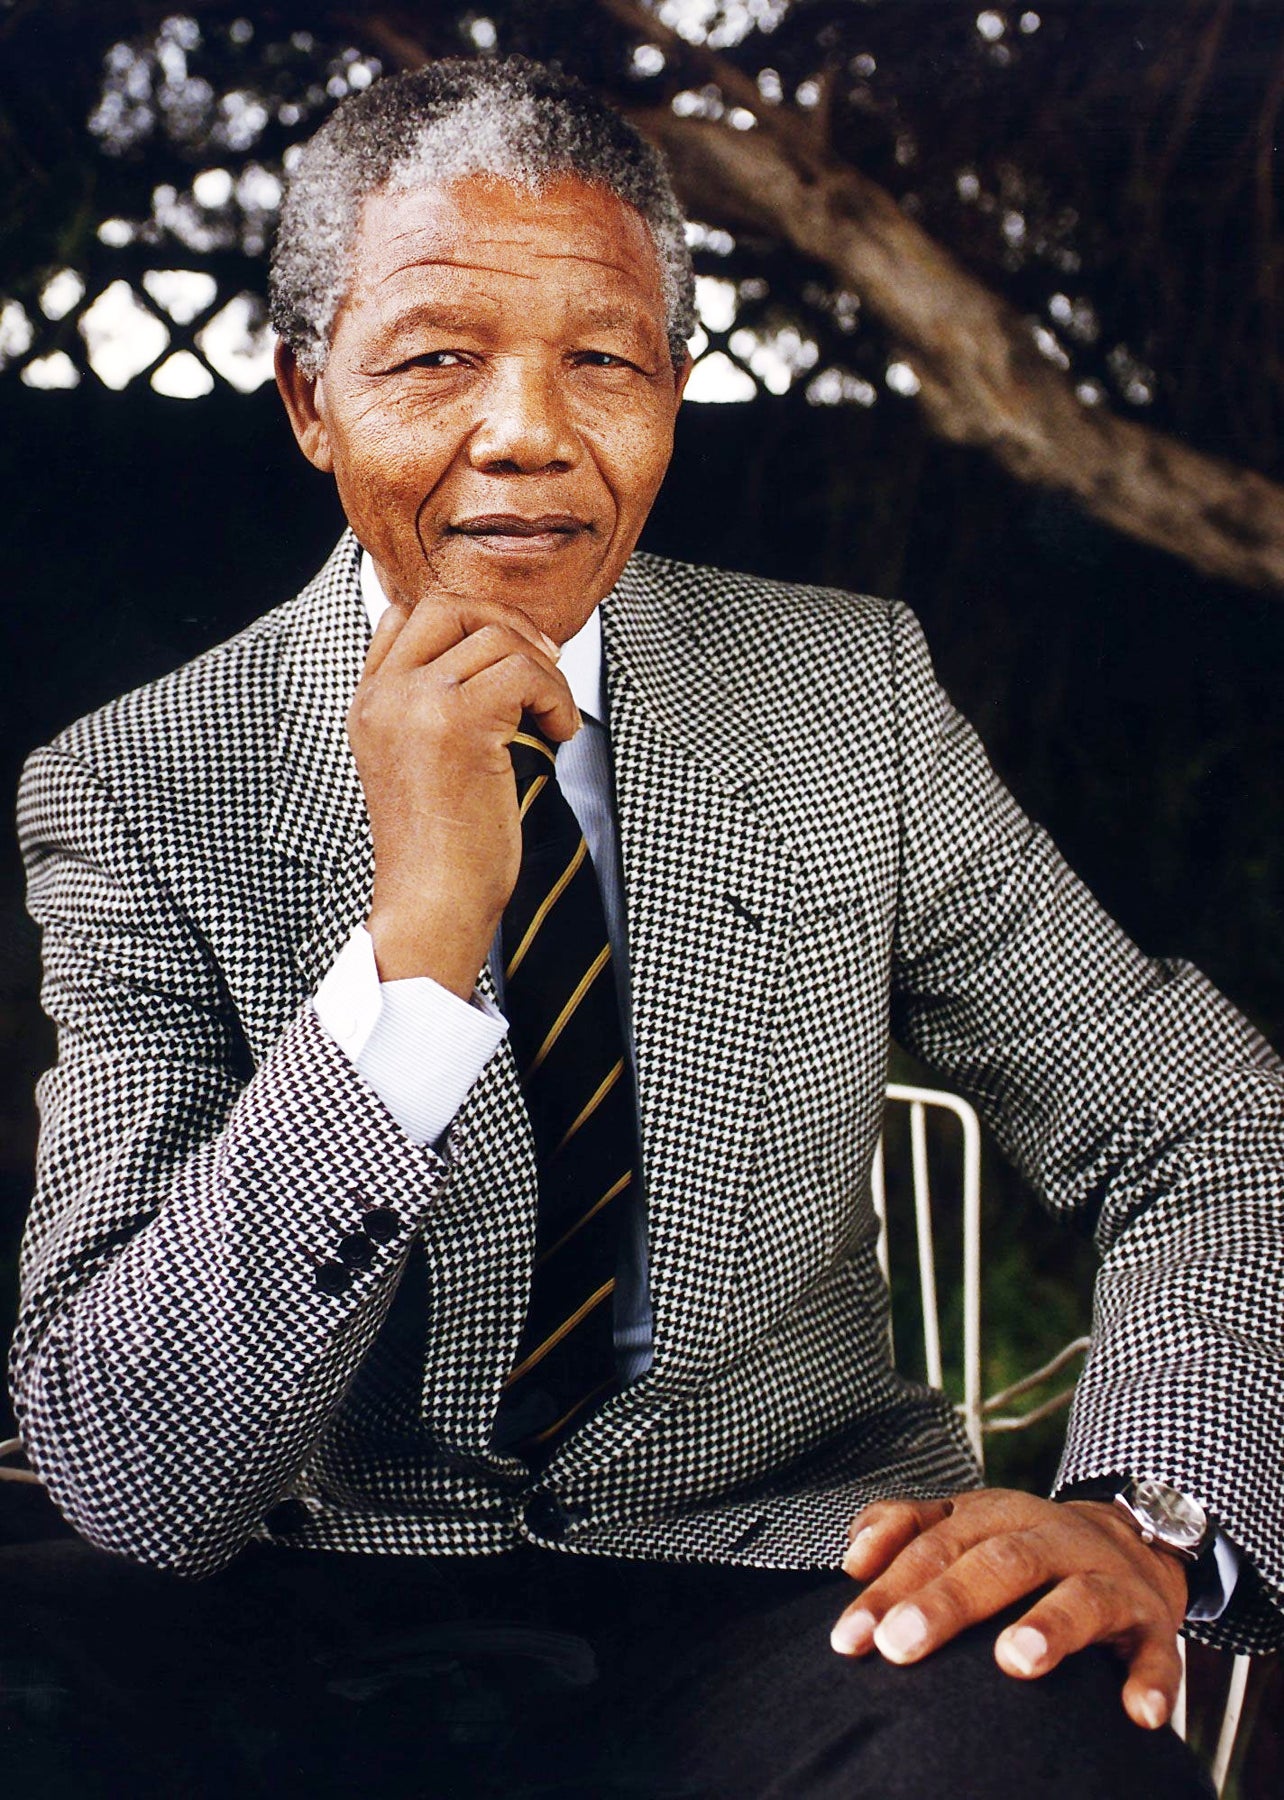 Nelson Mandela's Life in Pictures